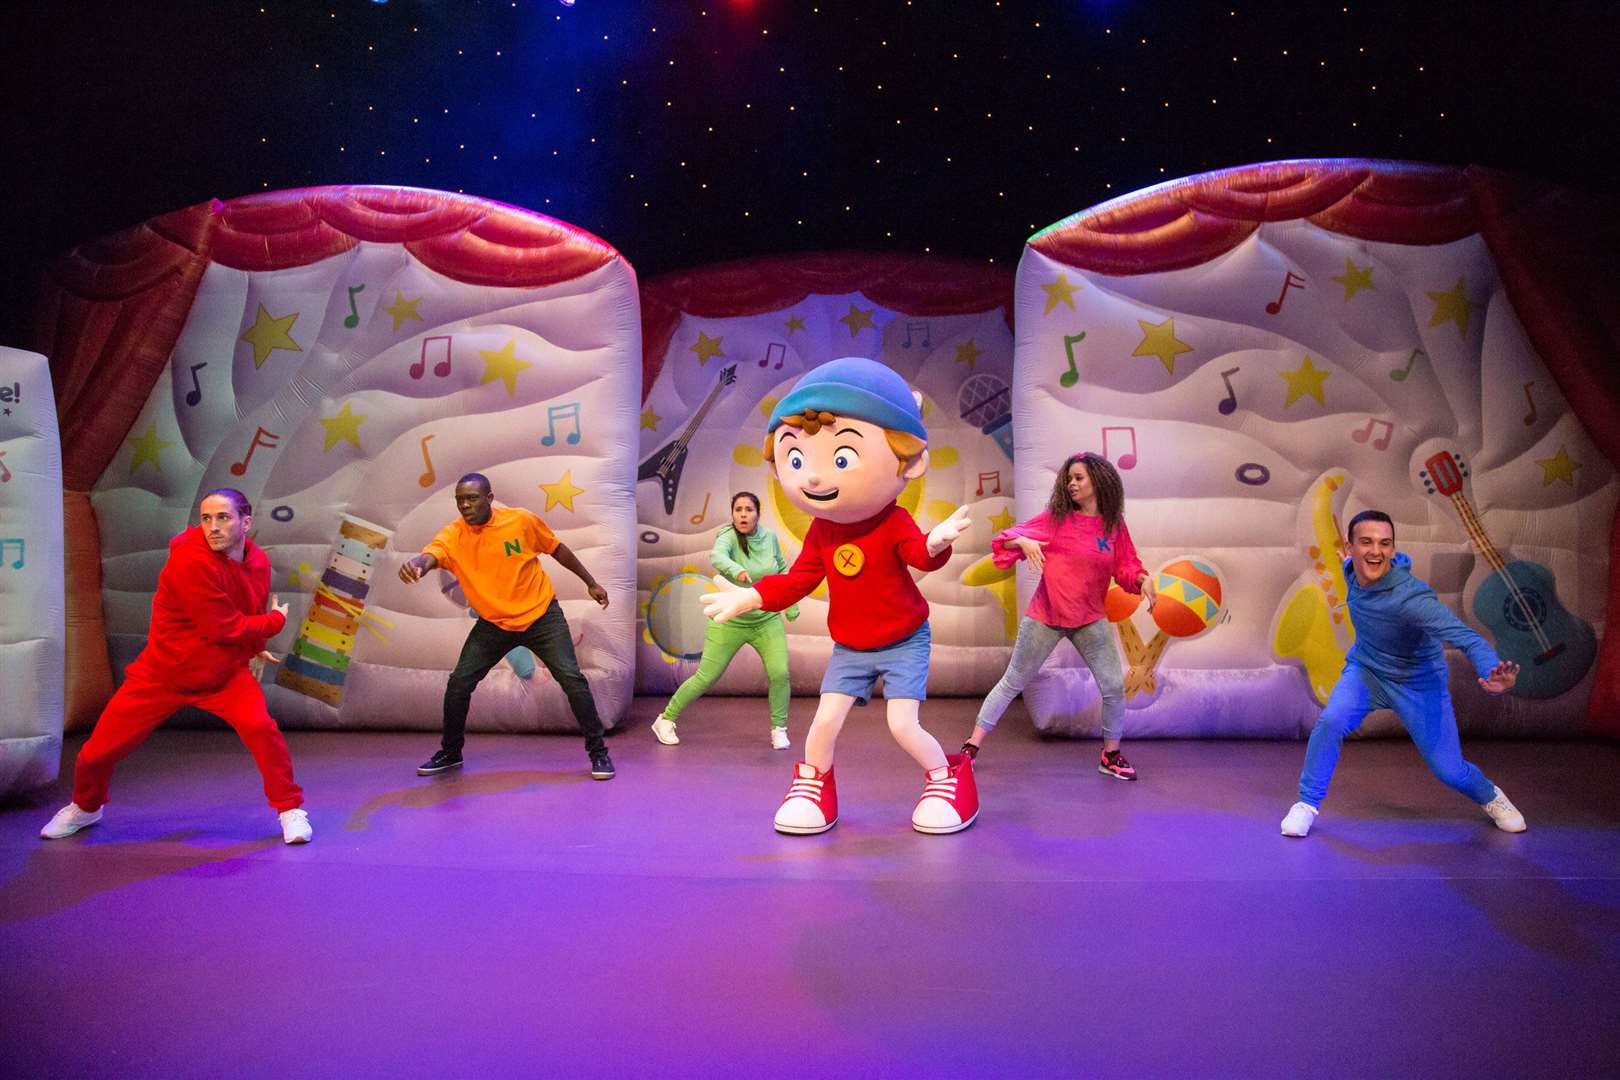 Noddy will be among the performers at this Sunday's Milkshake Live!